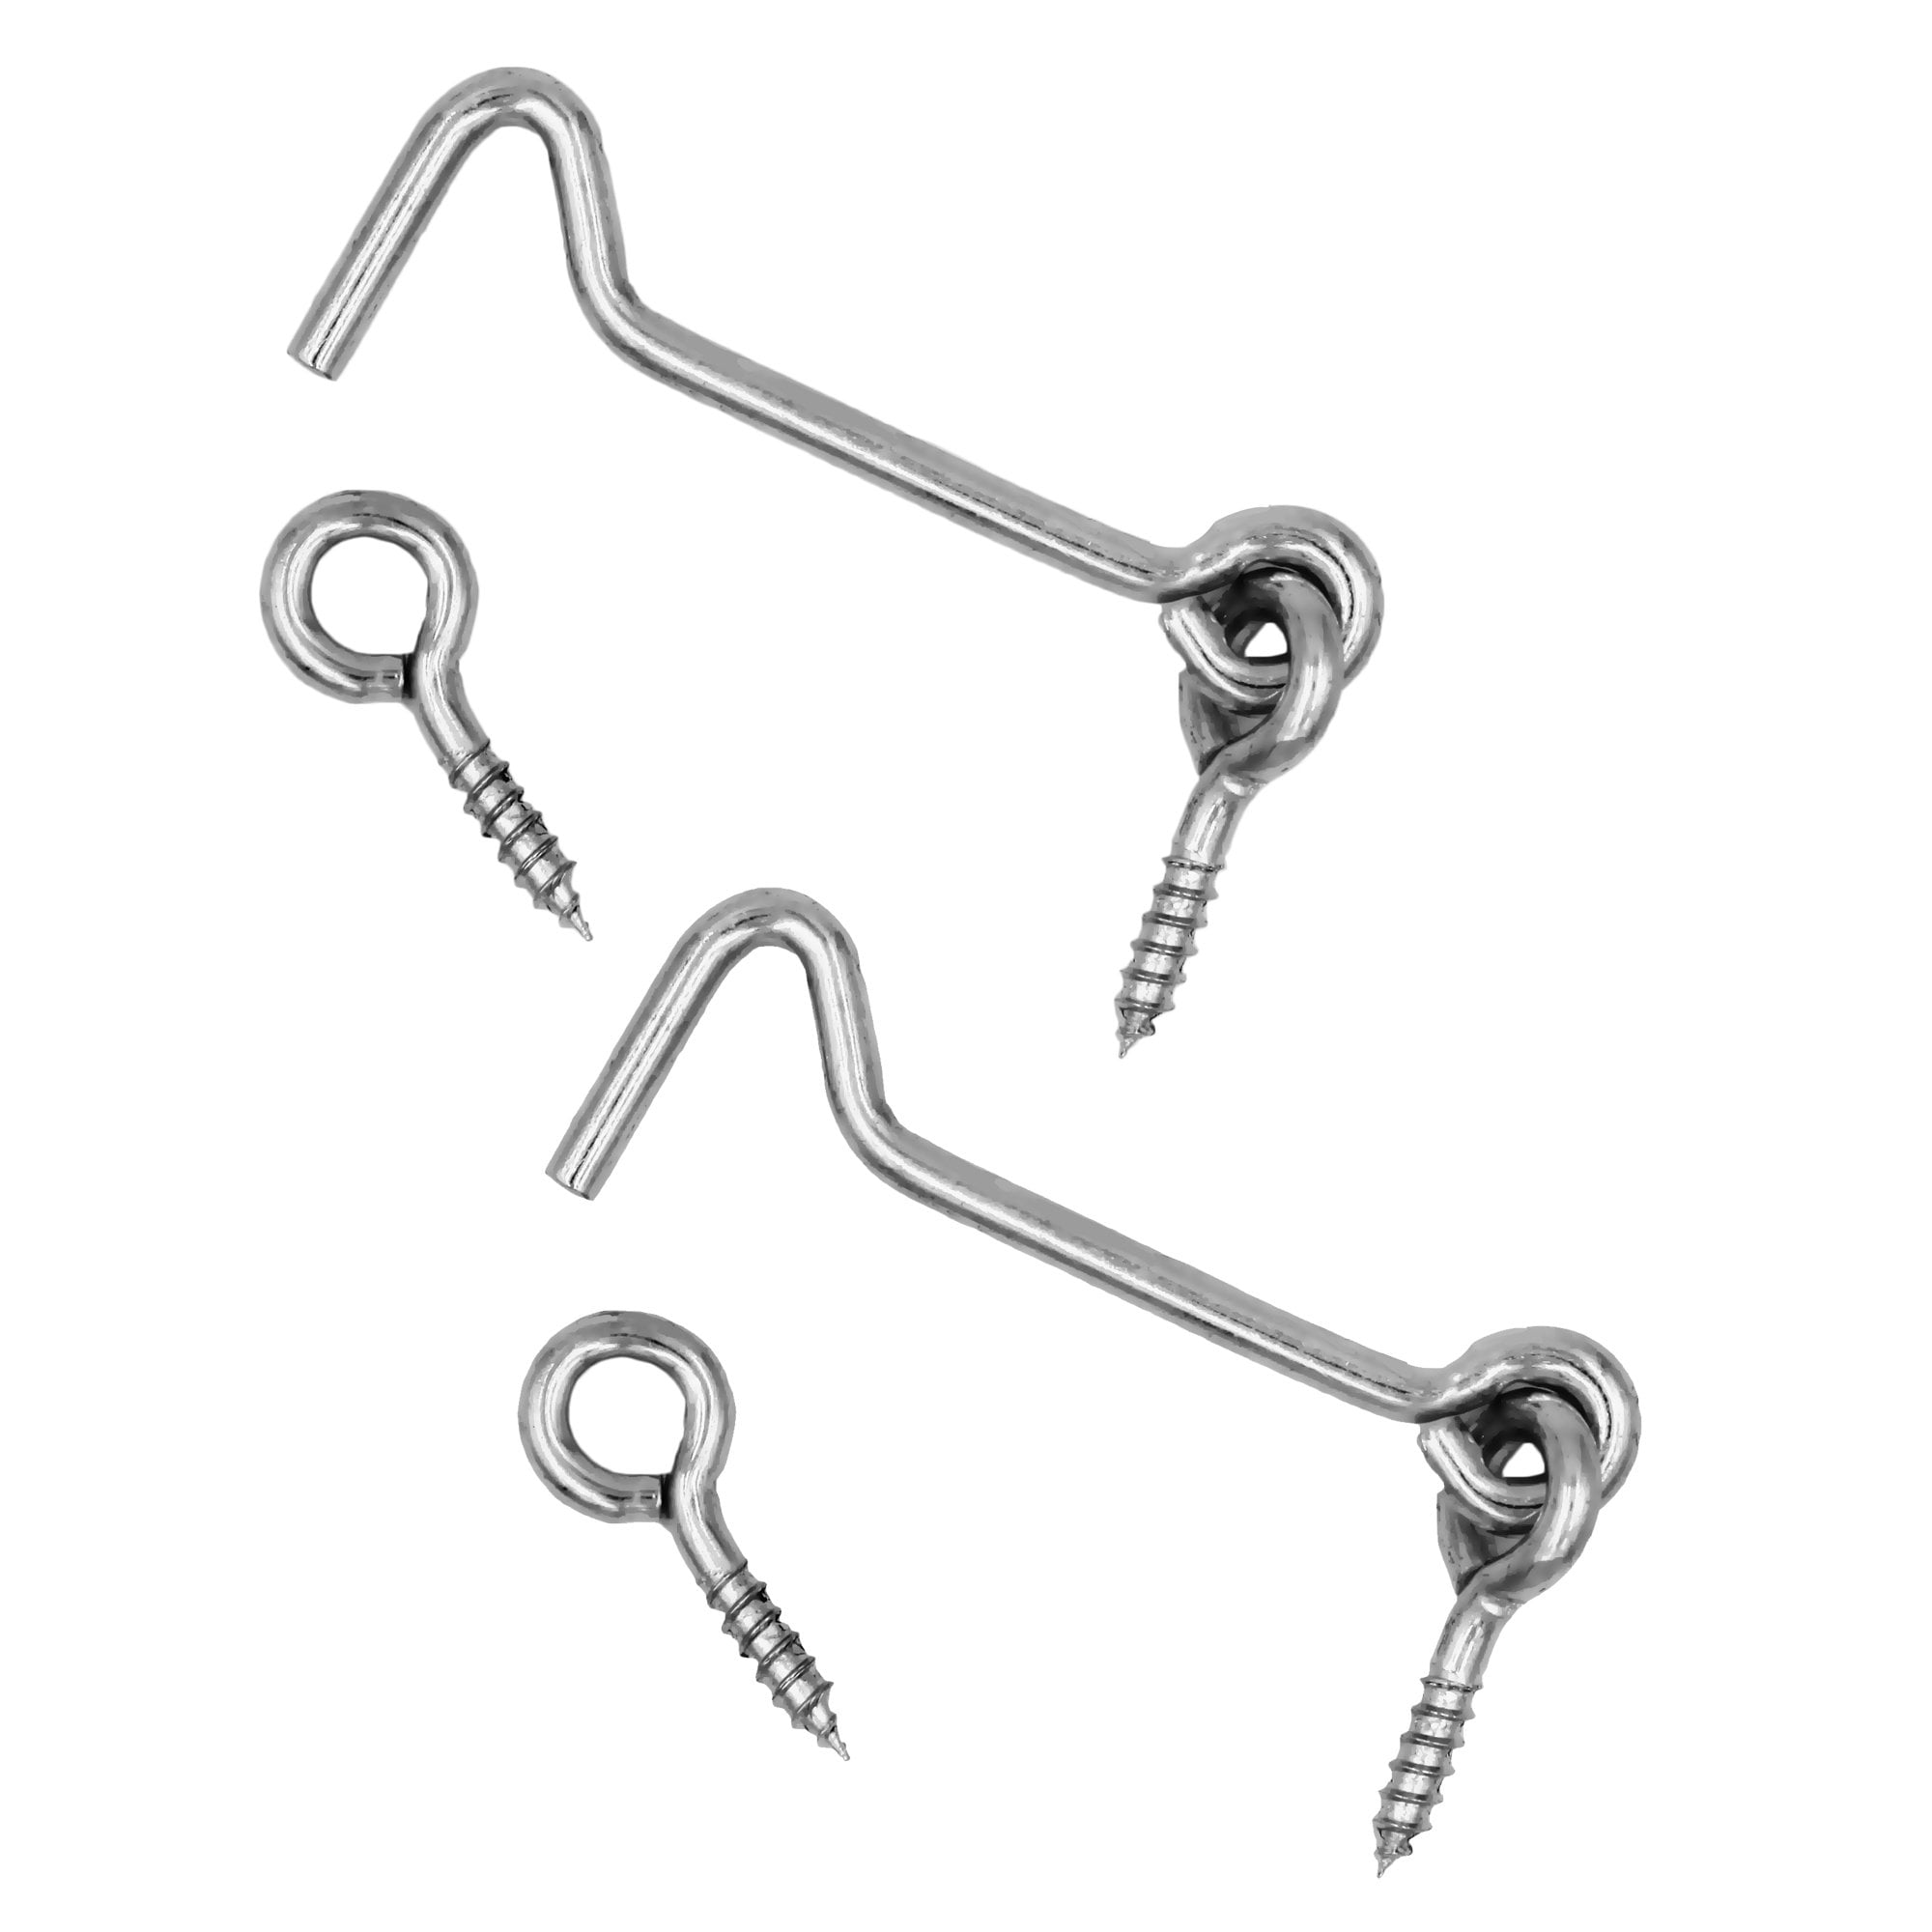 Wideskall 4 inch Heavy Duty Zinc Plated Wire Gate Hook and Eye Latch Pack  of 2